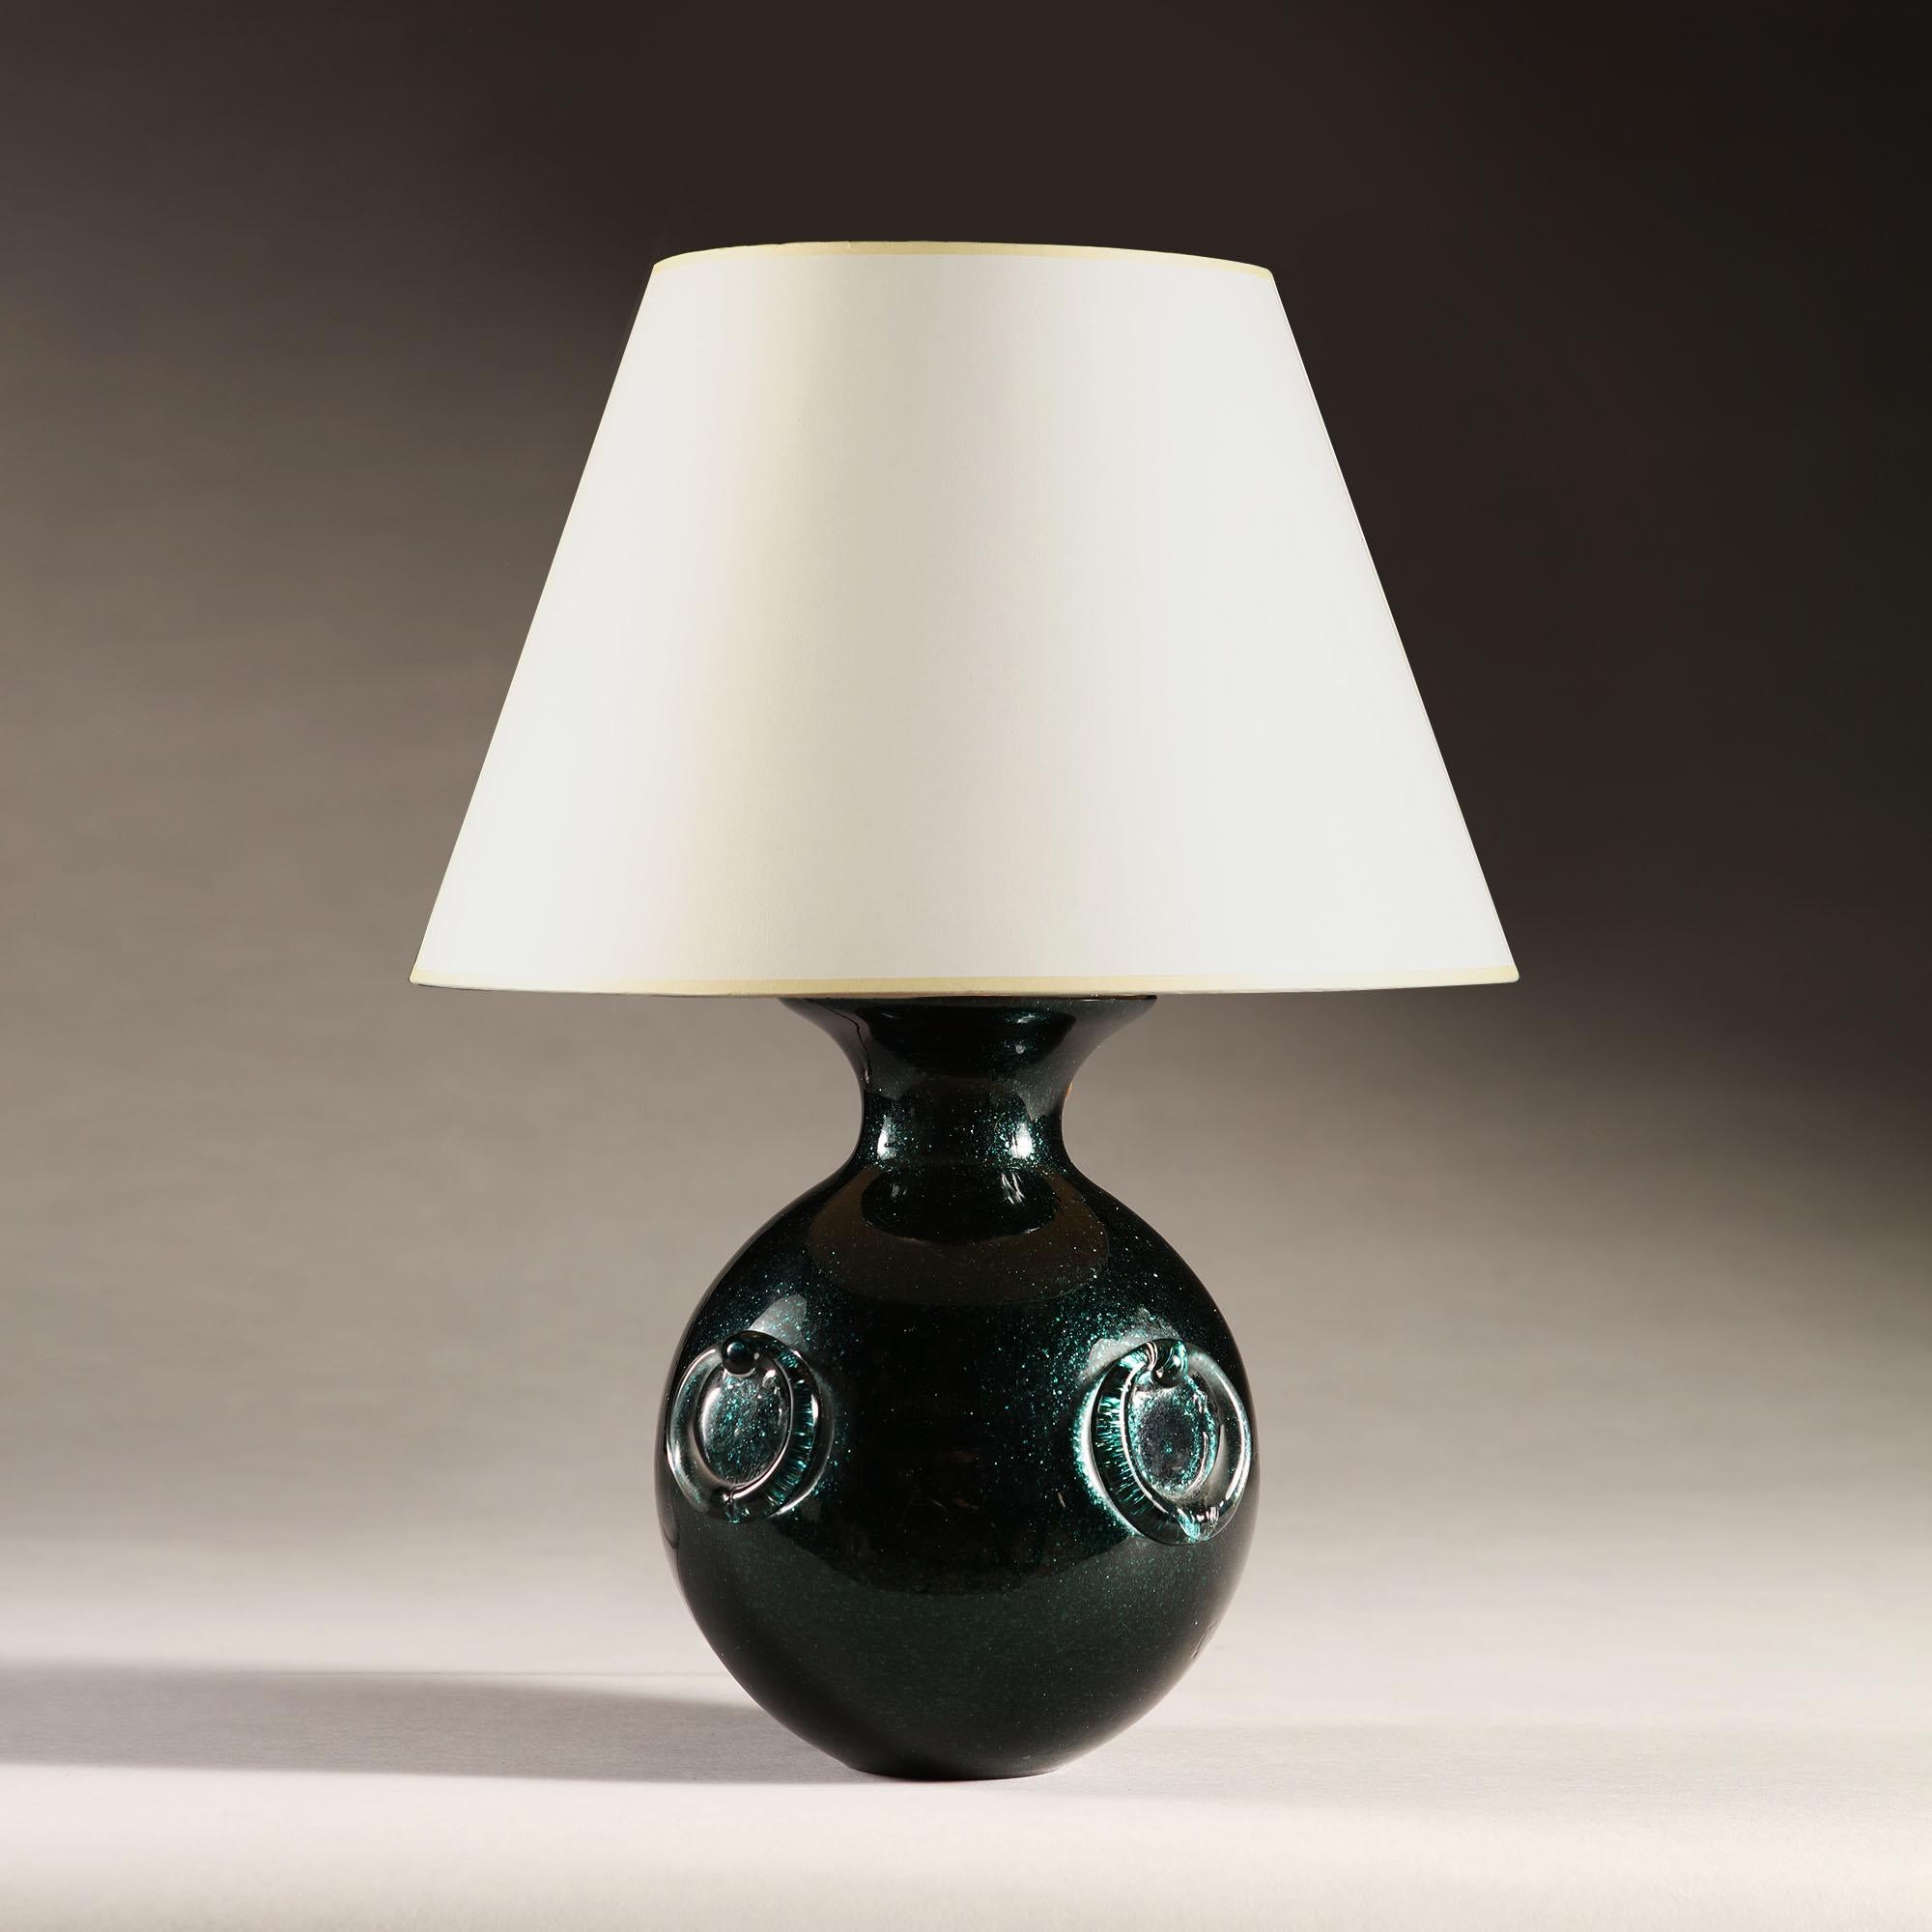 A small 20th century Murano glass ball lamp of iridescent dark green colour, with four clear glass handles to each side. 

Please note: lampshade not included.

Currently wired for the UK.